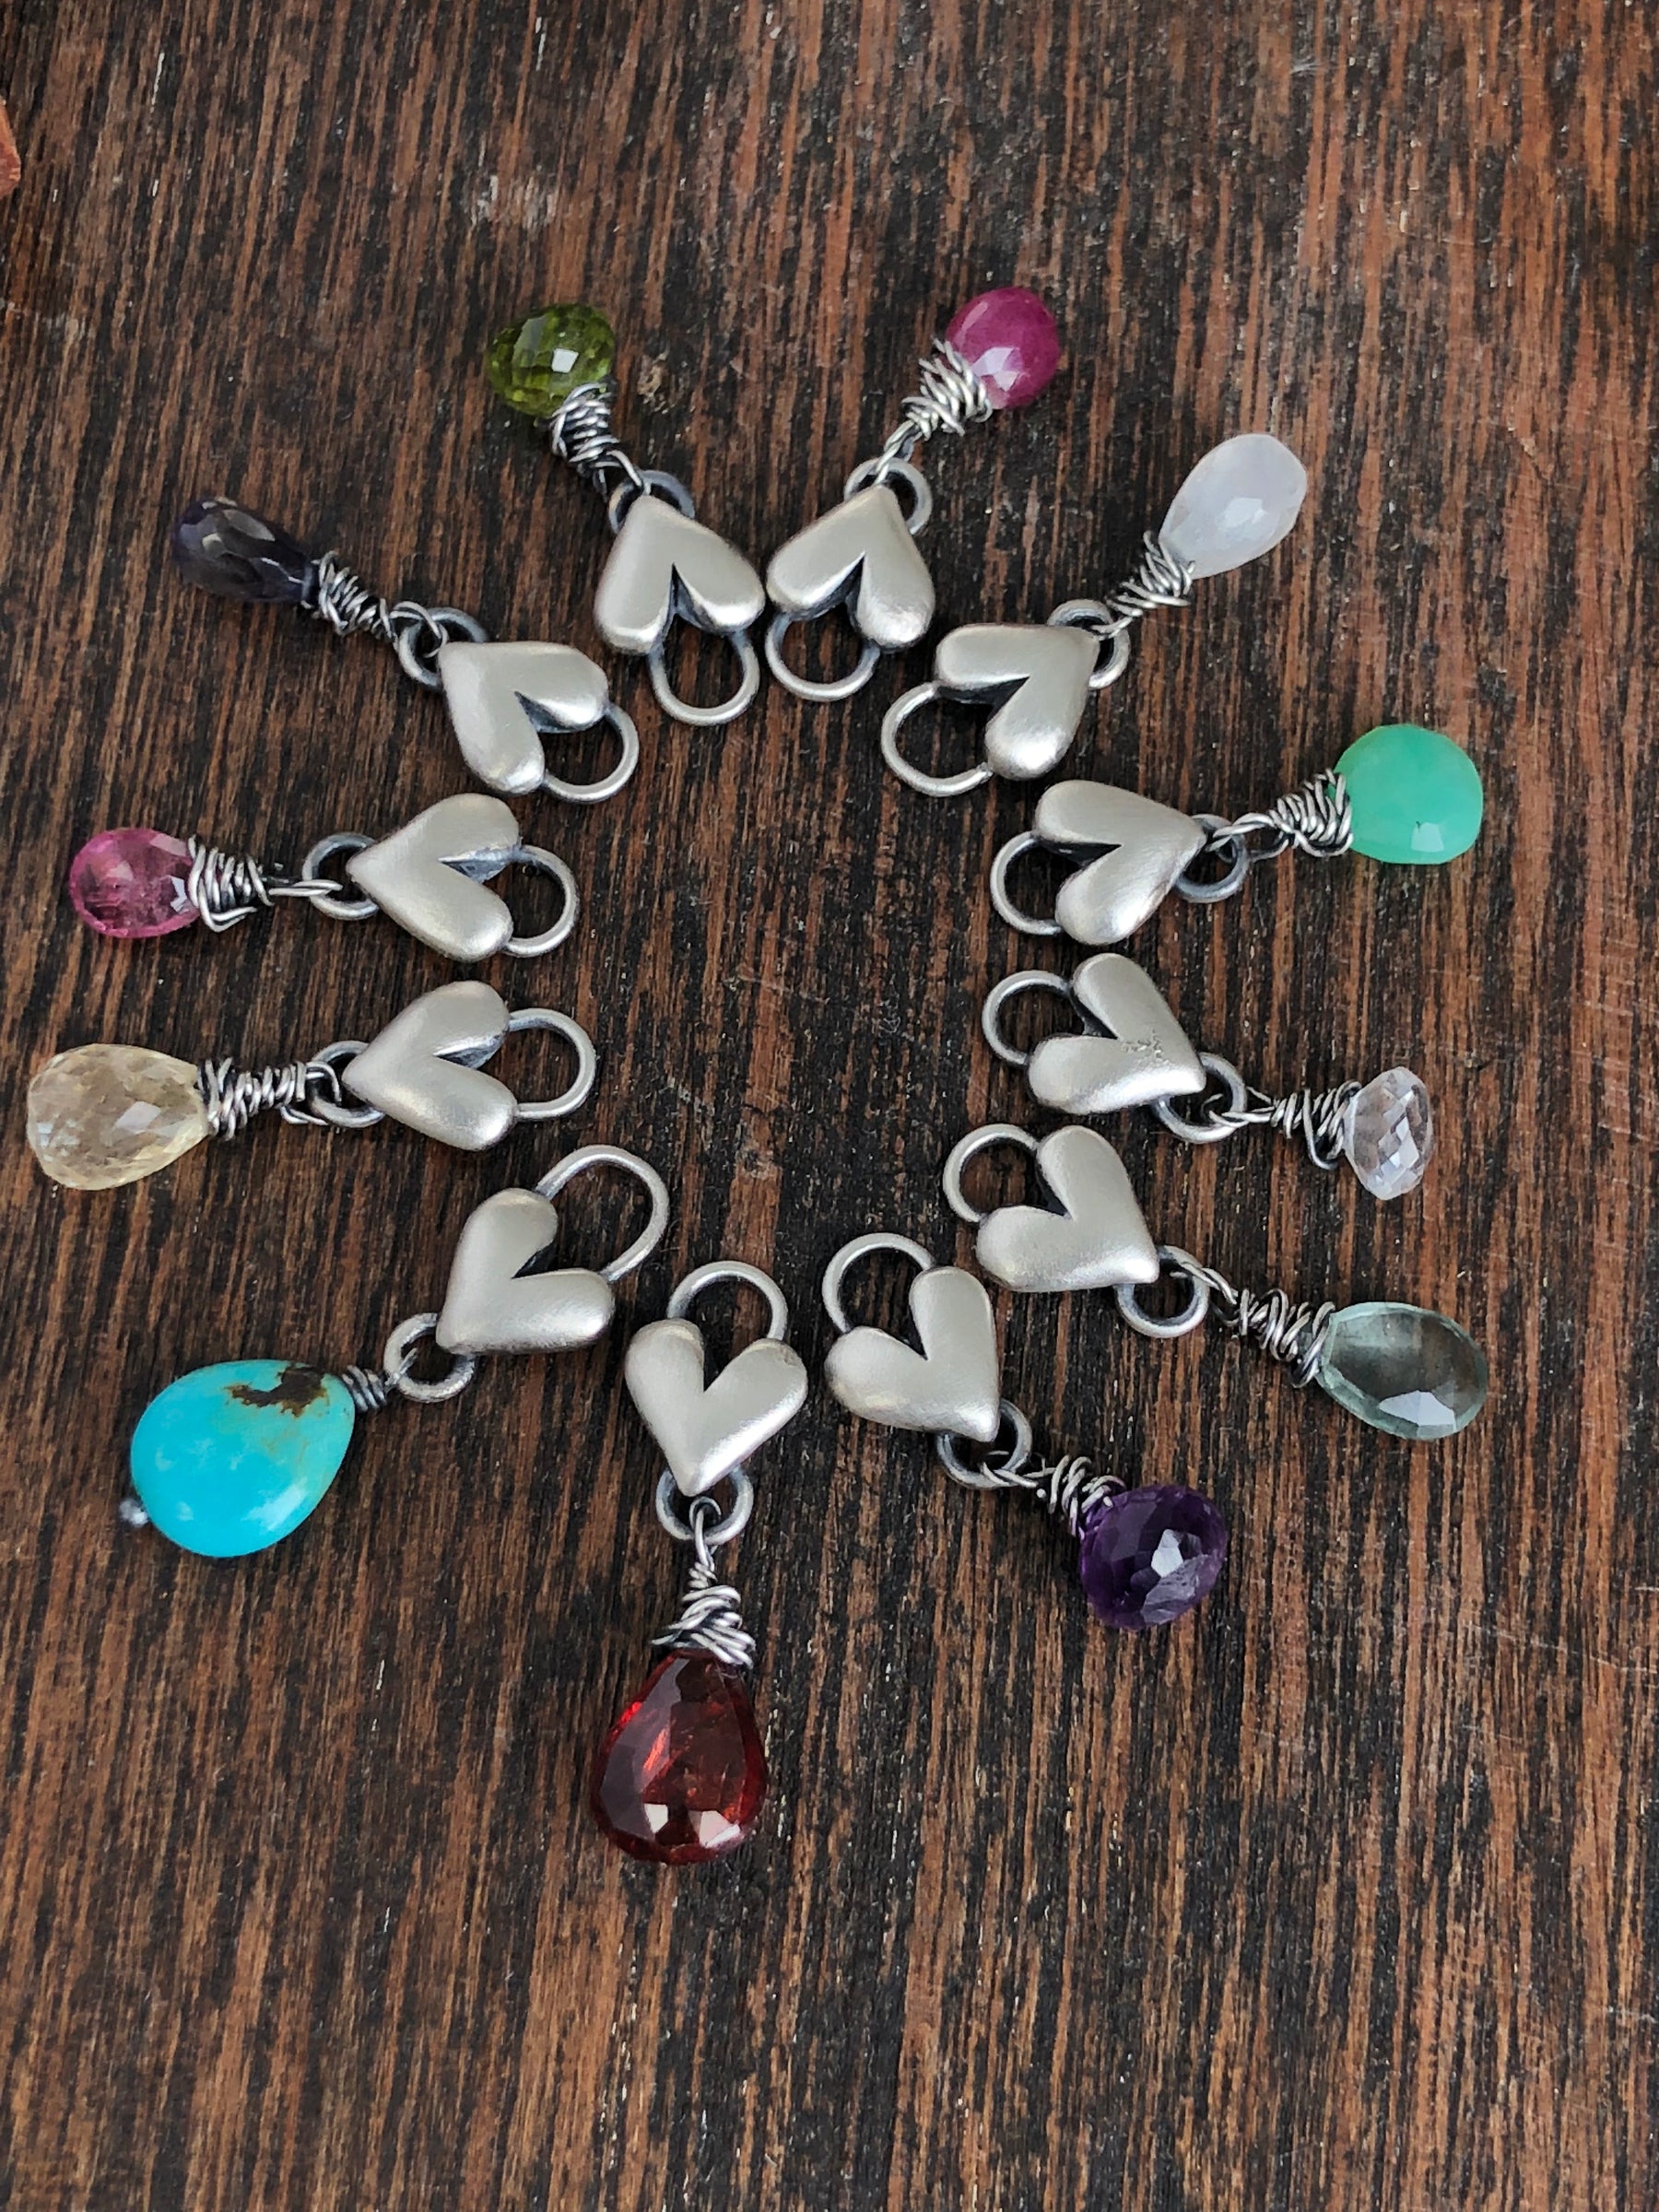 Sculpted Heart Birthstone Drop Necklace